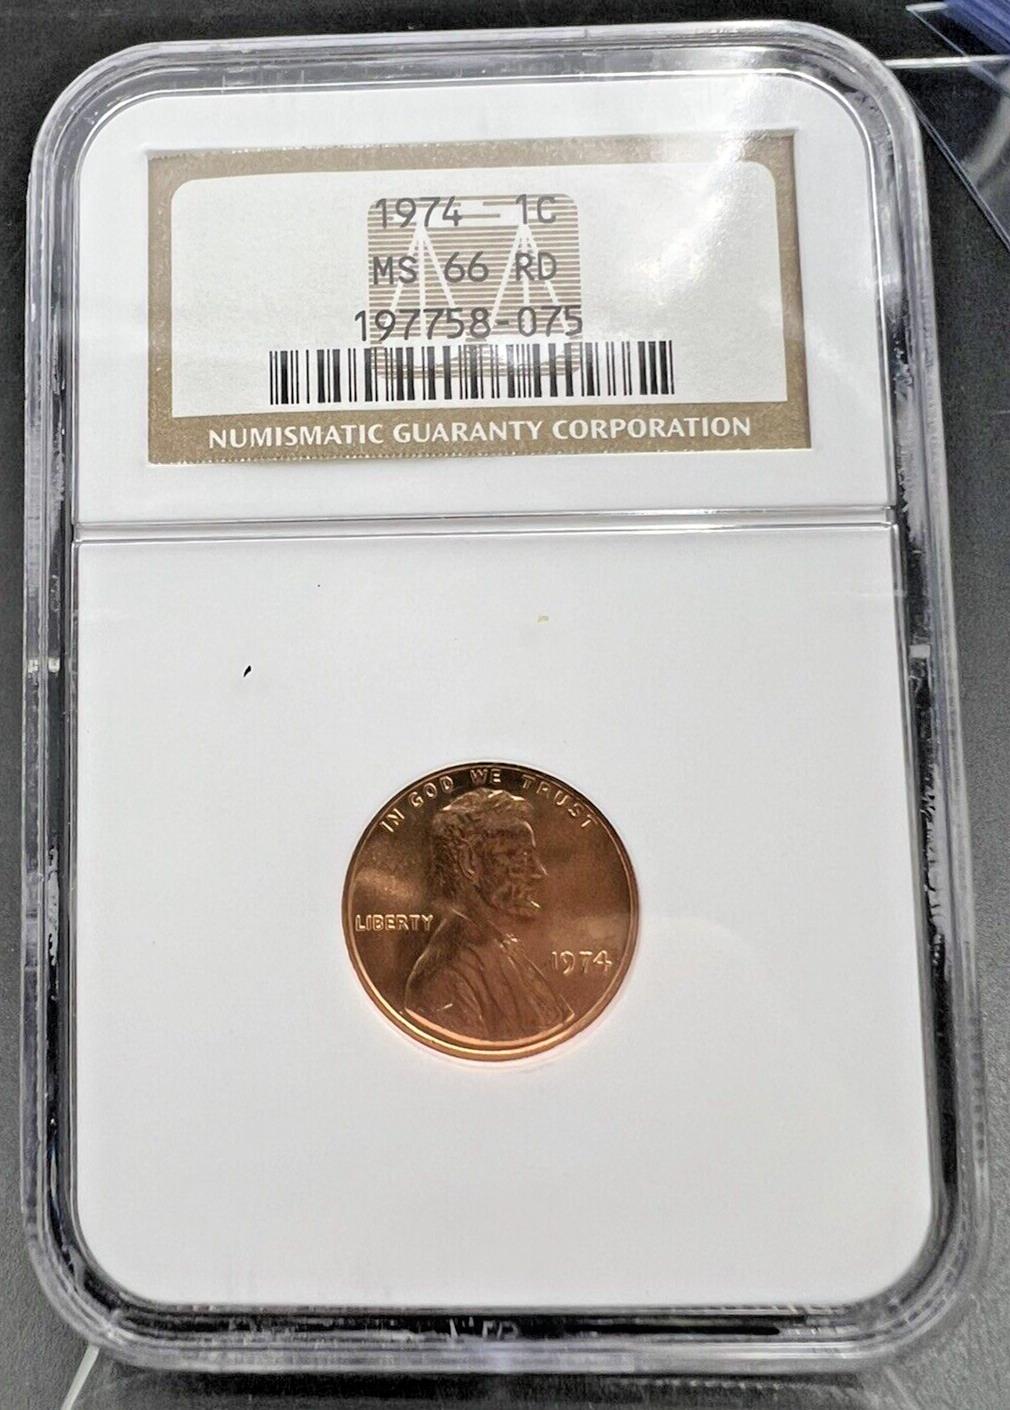 1974 P Lincoln Memorial Cent Penny Coin NGC MS66 RD Gem BU Certified #2